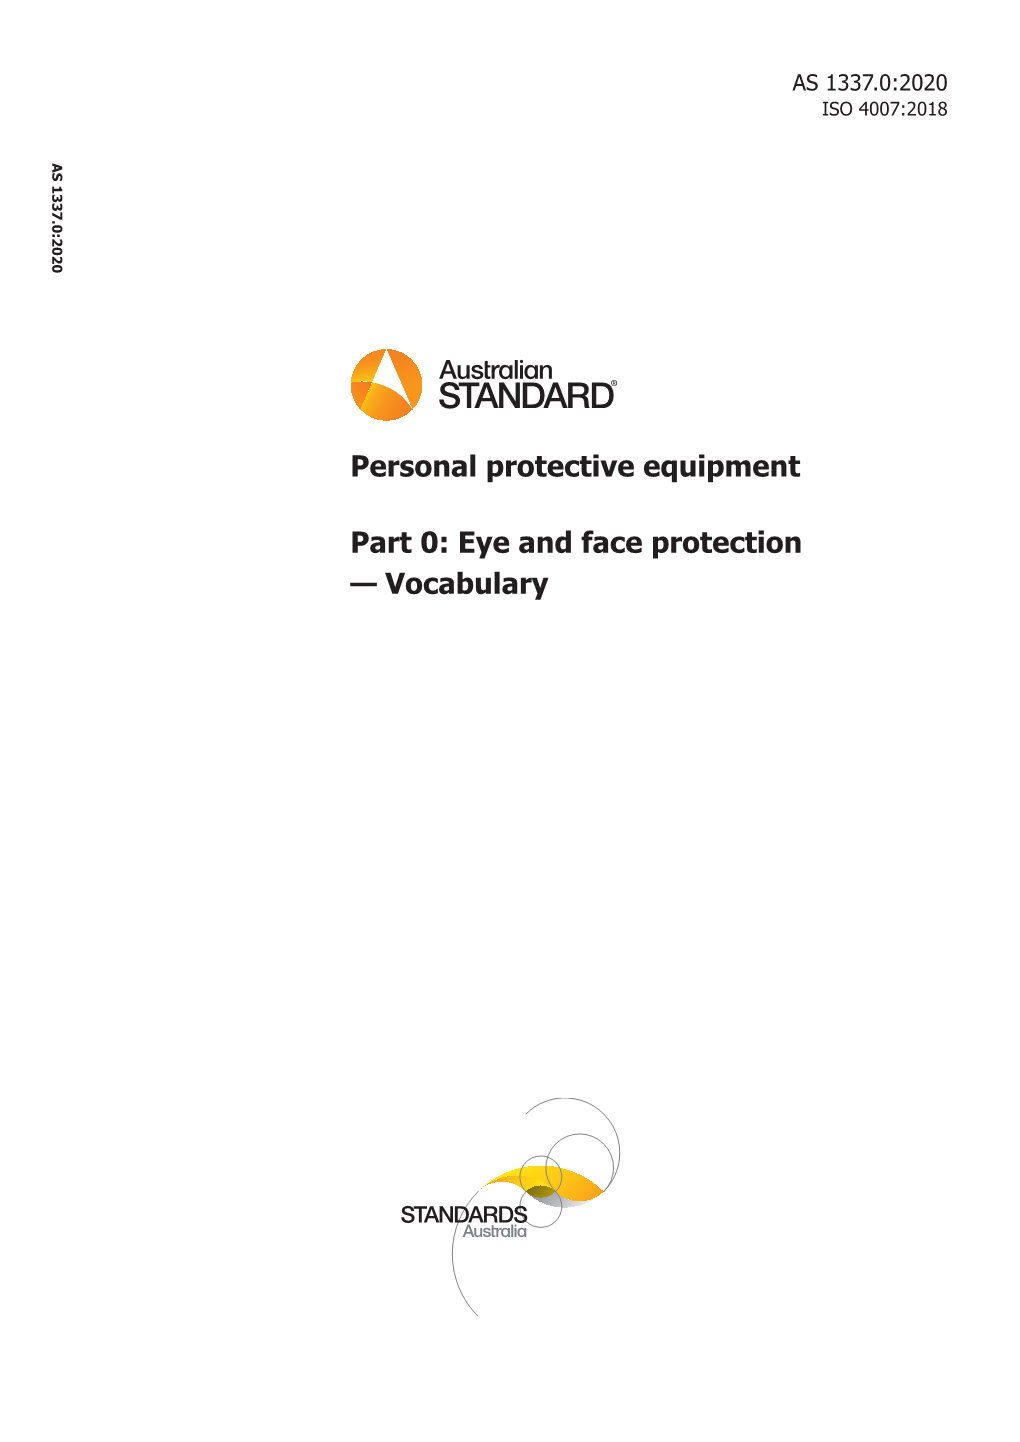 Personal Protective Equipment Part 0: Eye and Face Protection — Vocabulary